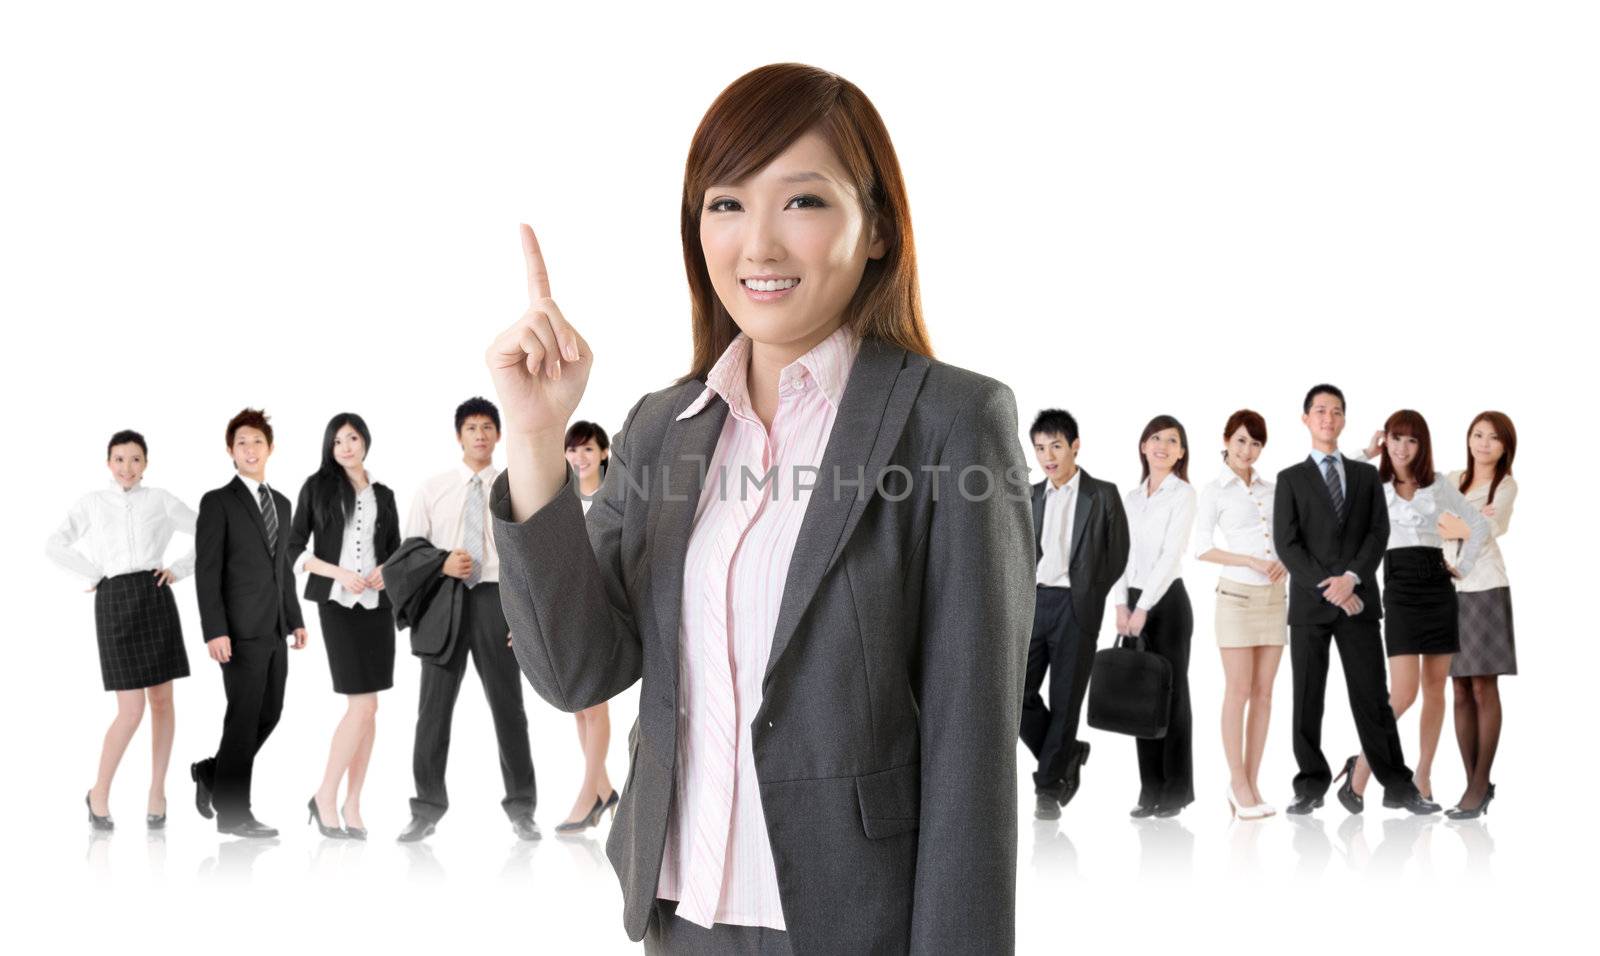 Smiling business executive woman of Asian have an idea in front of her team isolated on white background.